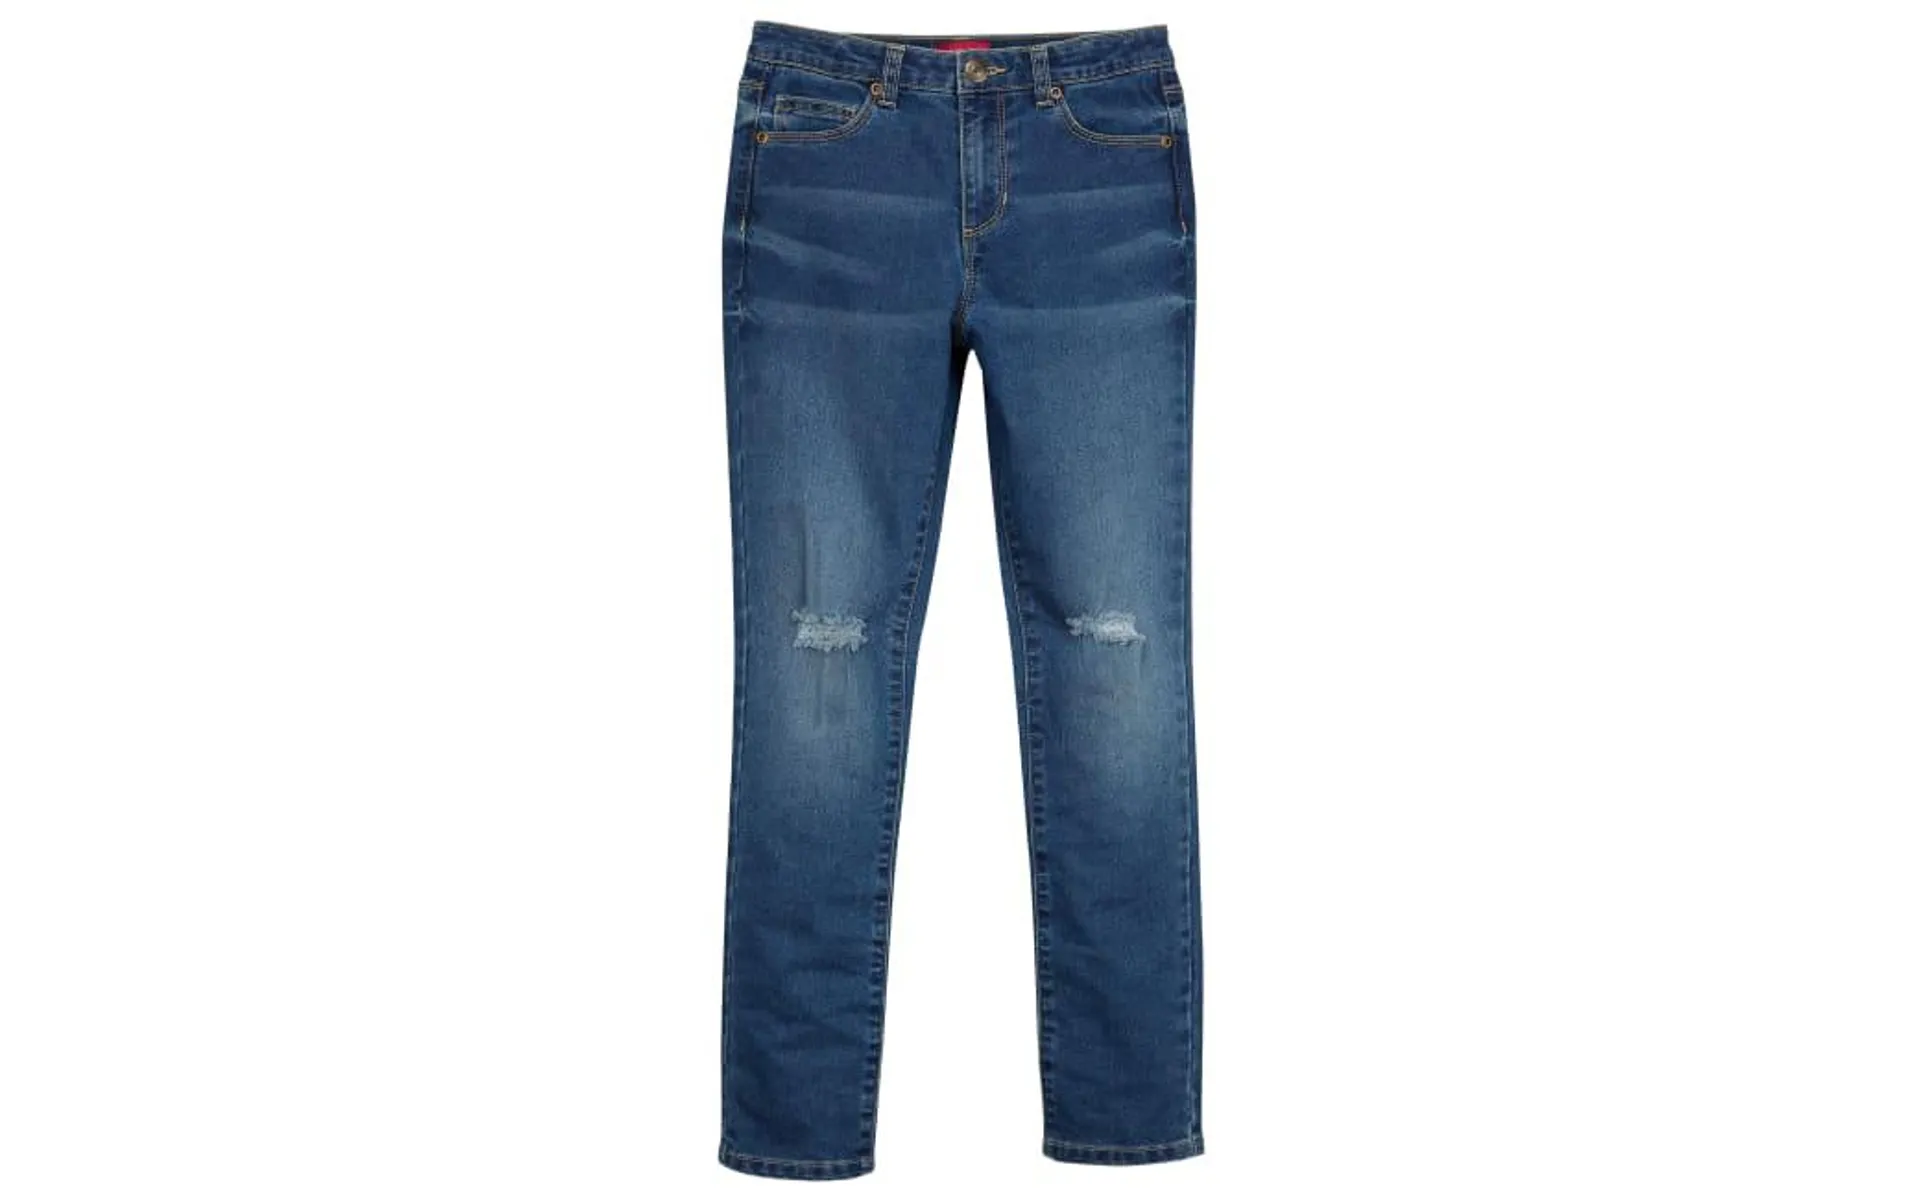 Outdoor Kids Denim Jeans for Toddlers or Girls